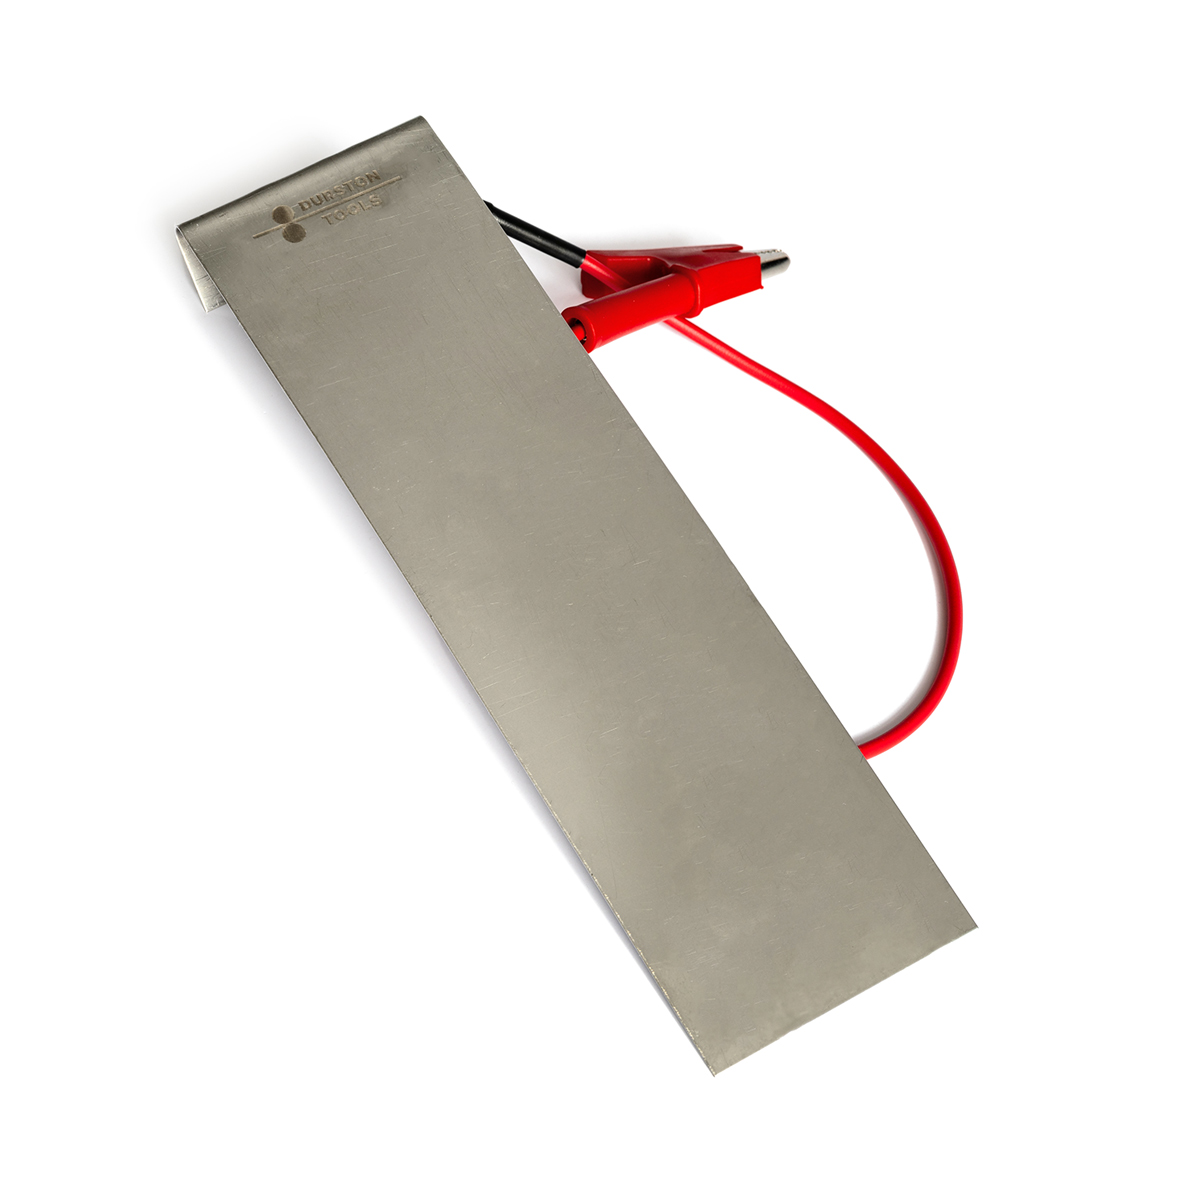 Durston 316 Stainless Steel Anode